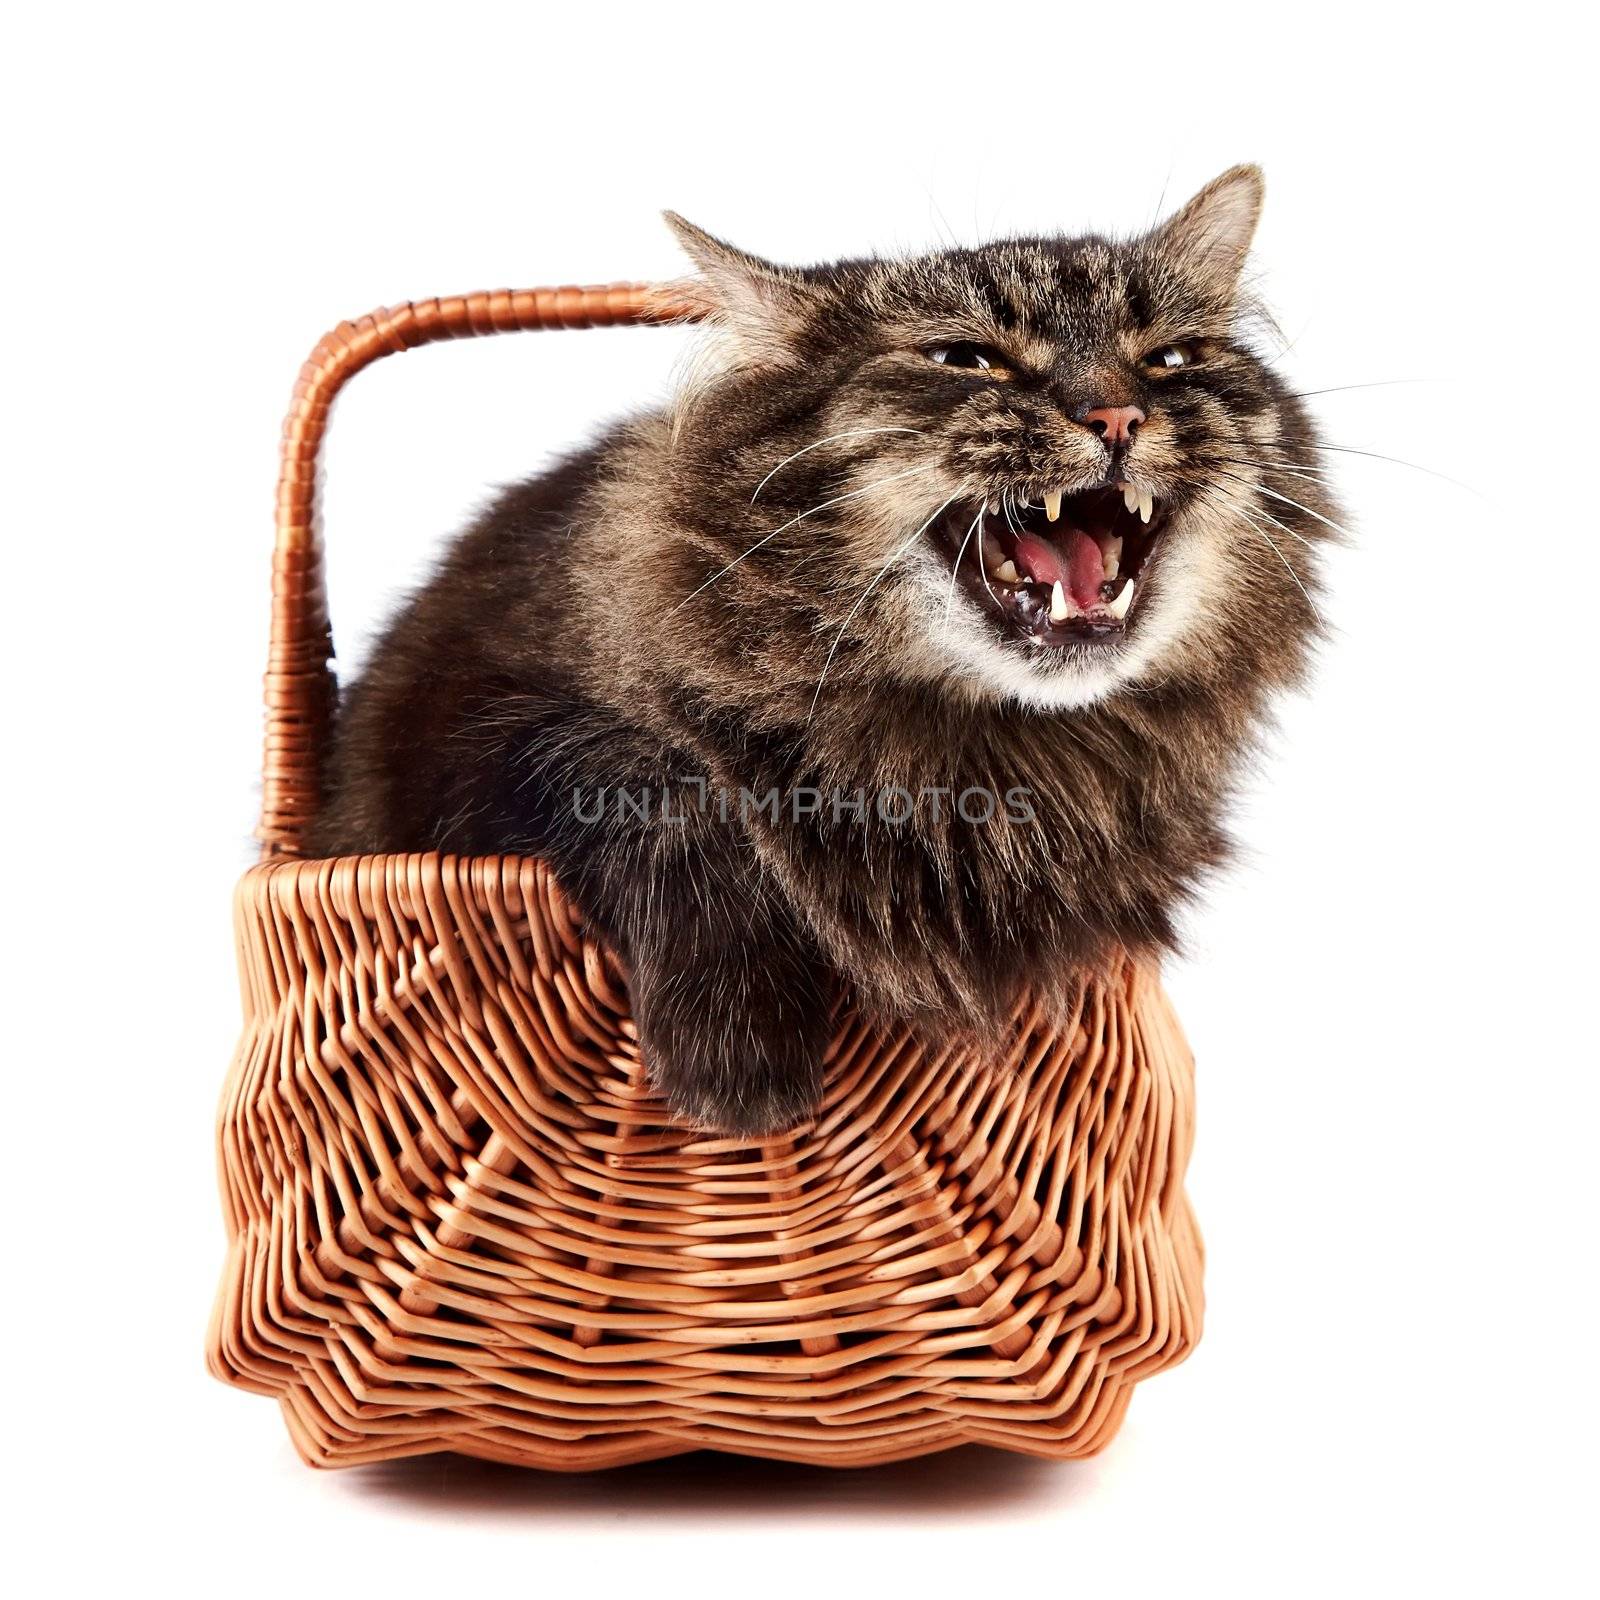 Mewing a fluffy cat in a wattled basket on a white background